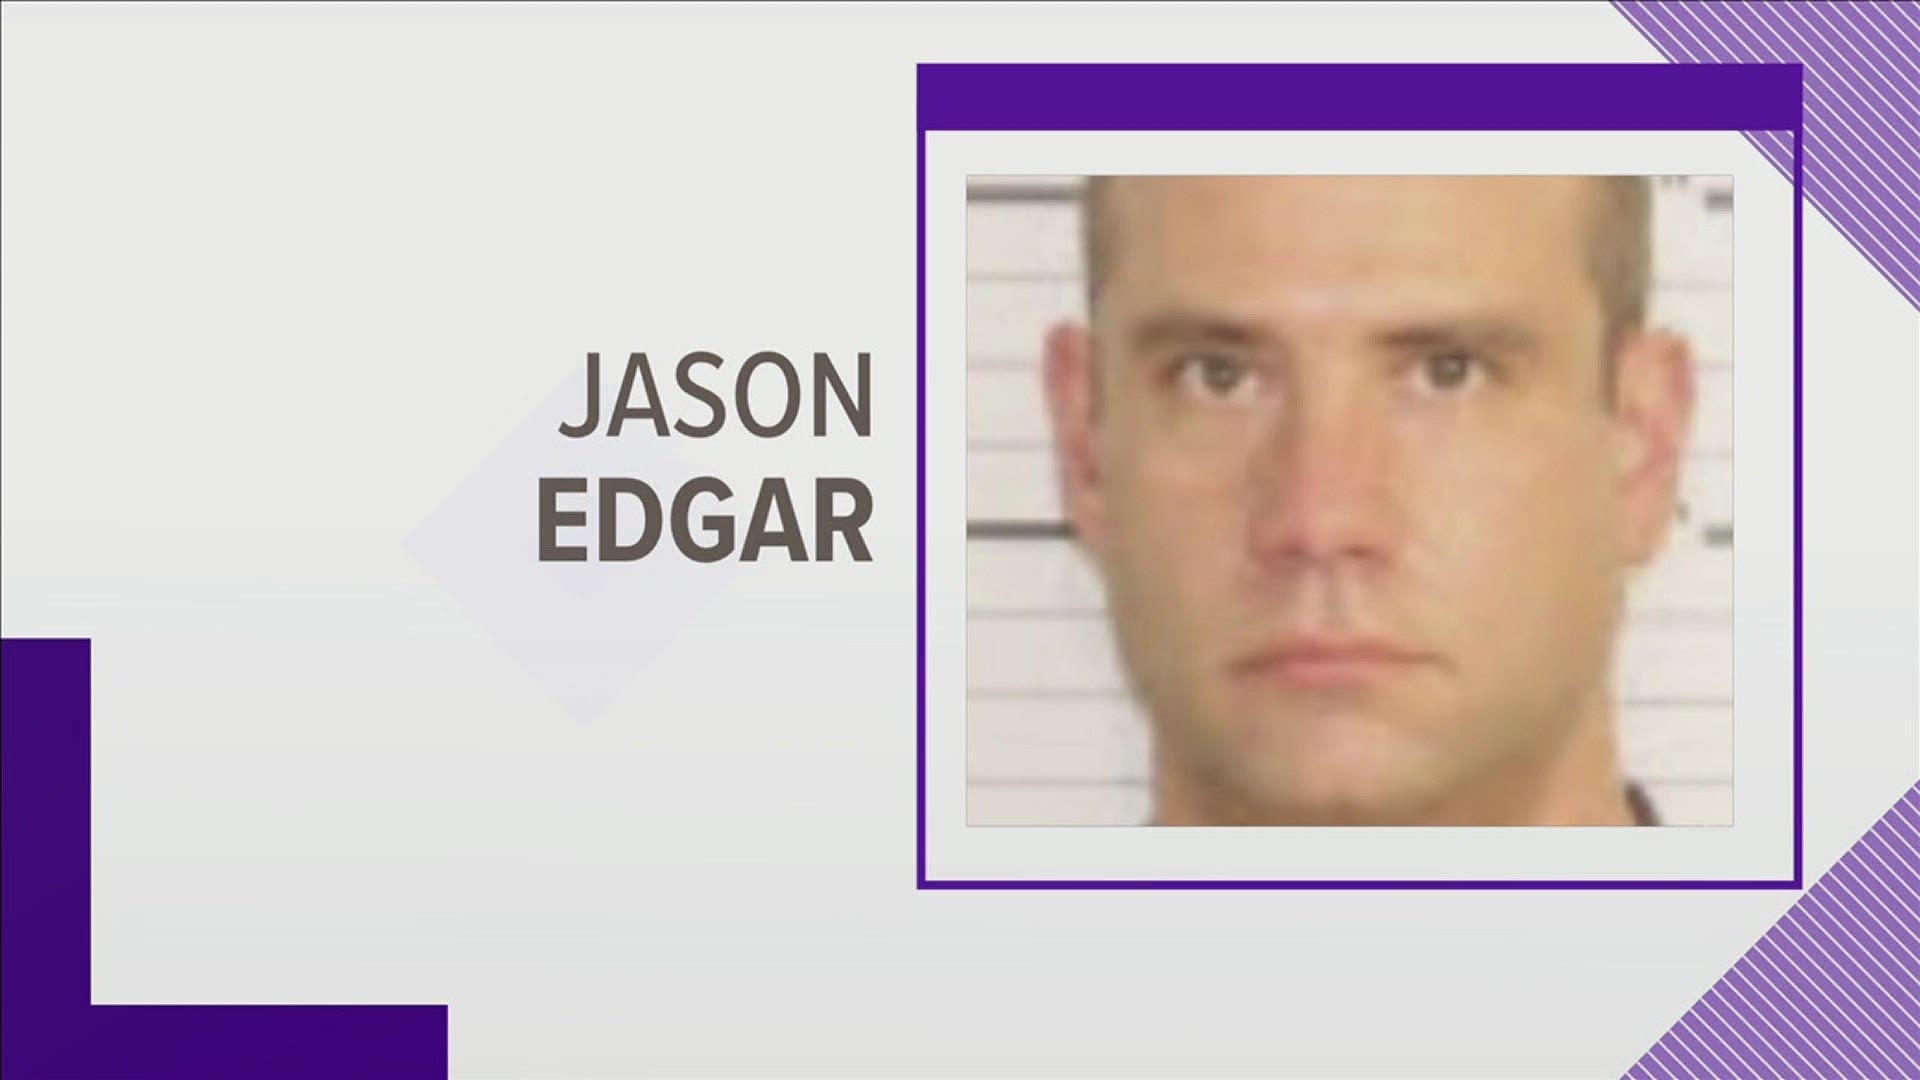 Jason Edgar is charged with sexual exploitation of a minor. He is suspended from the fire department without pay.